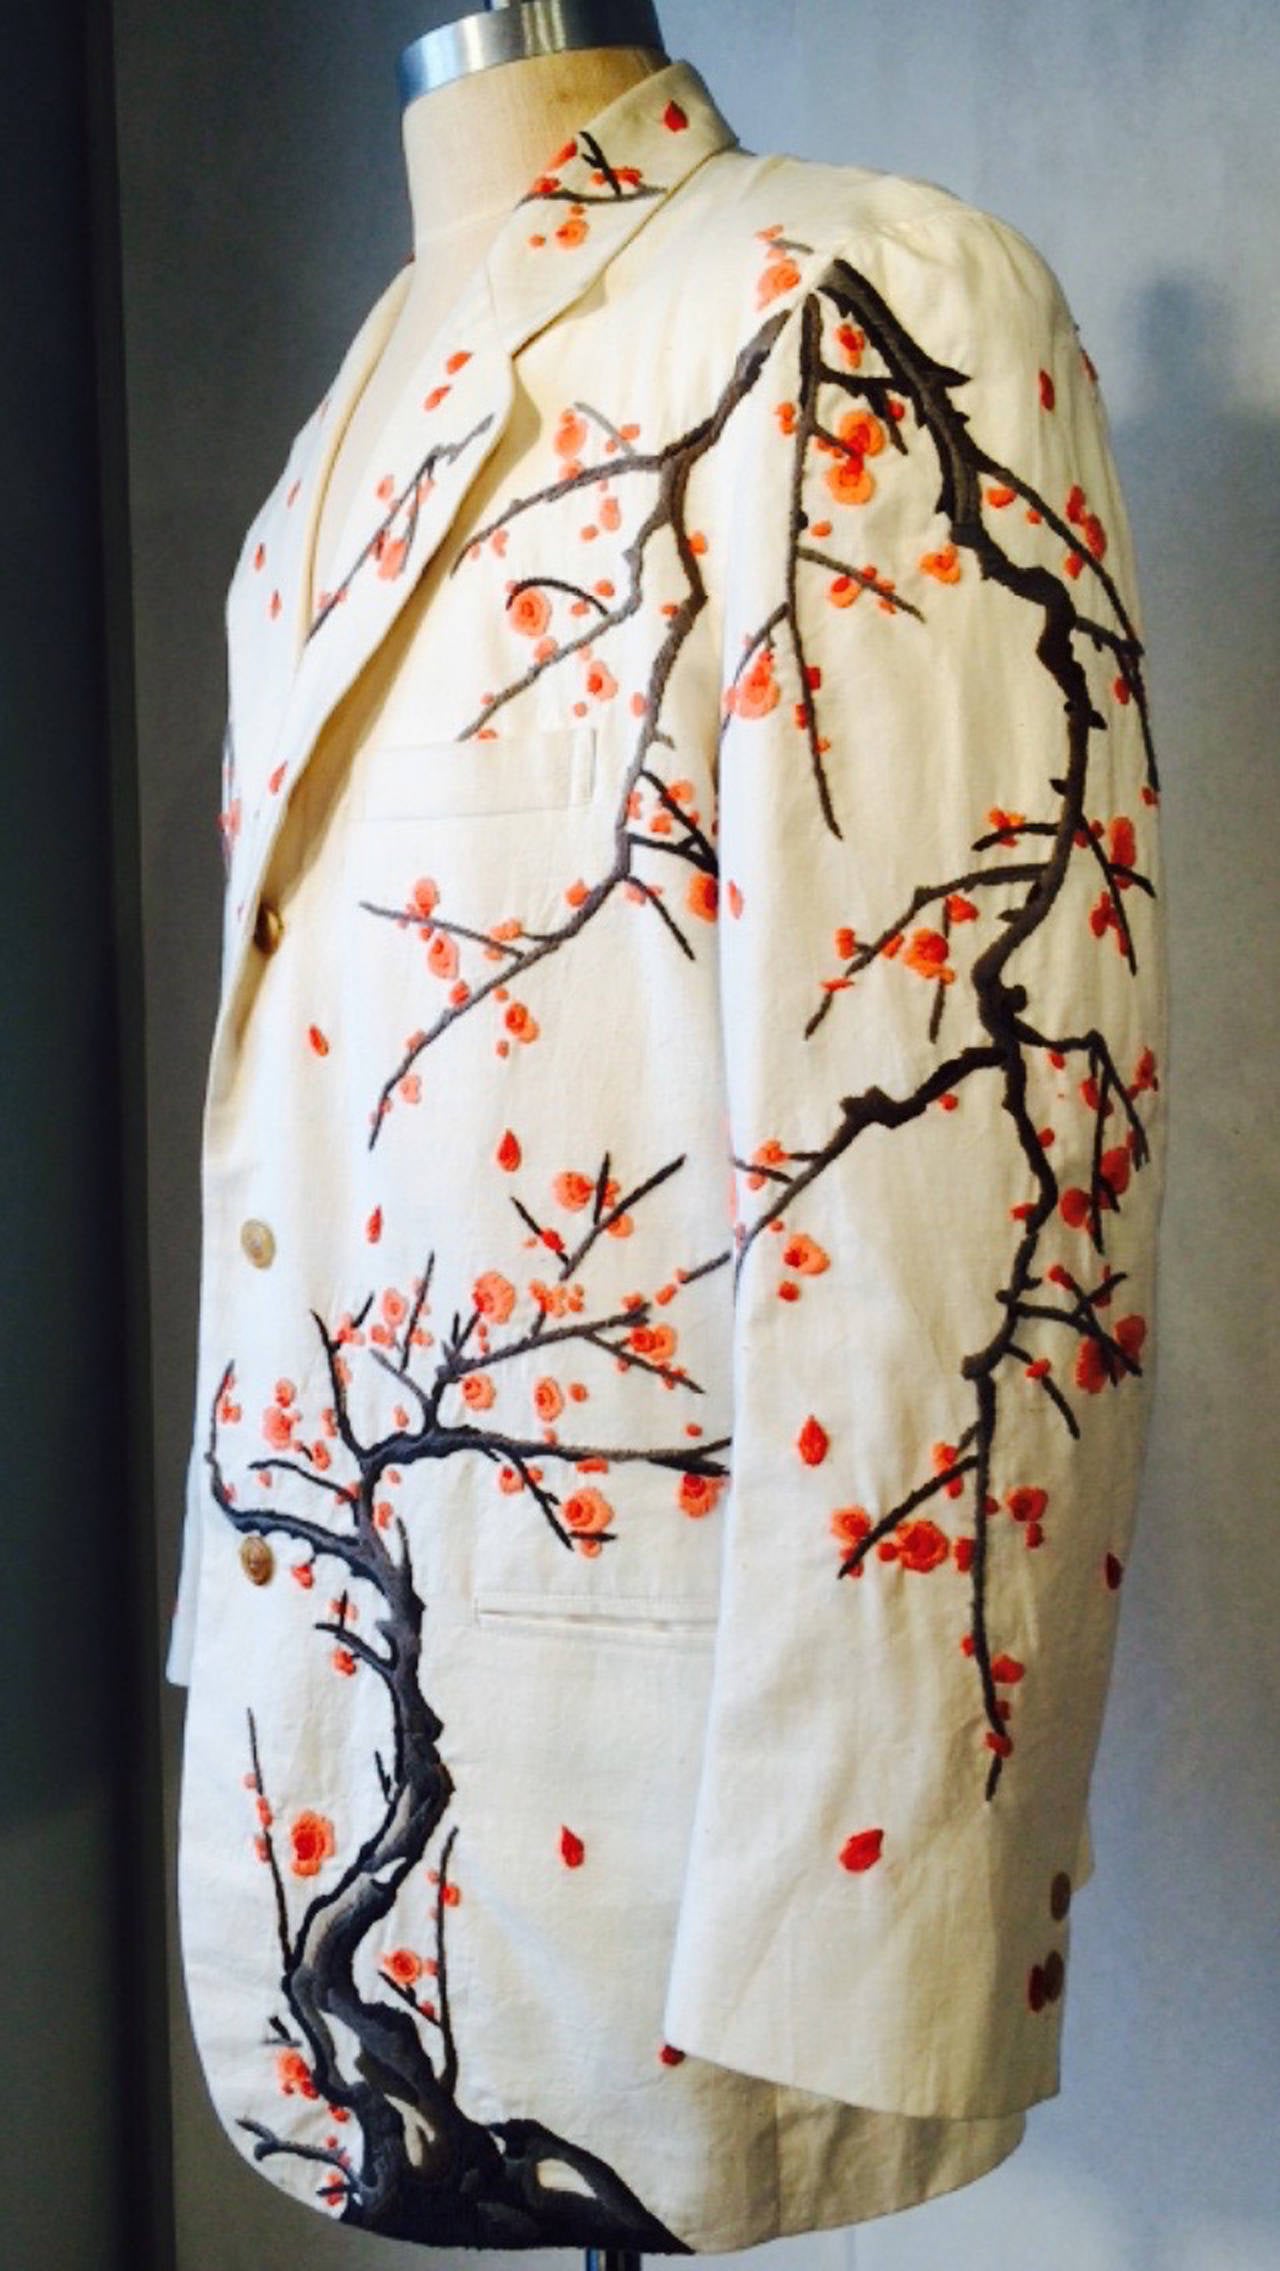 Gents Issey Miyake Cherry Blossom Embroidered Jacket 1990s In New Condition For Sale In Phoenix, AZ